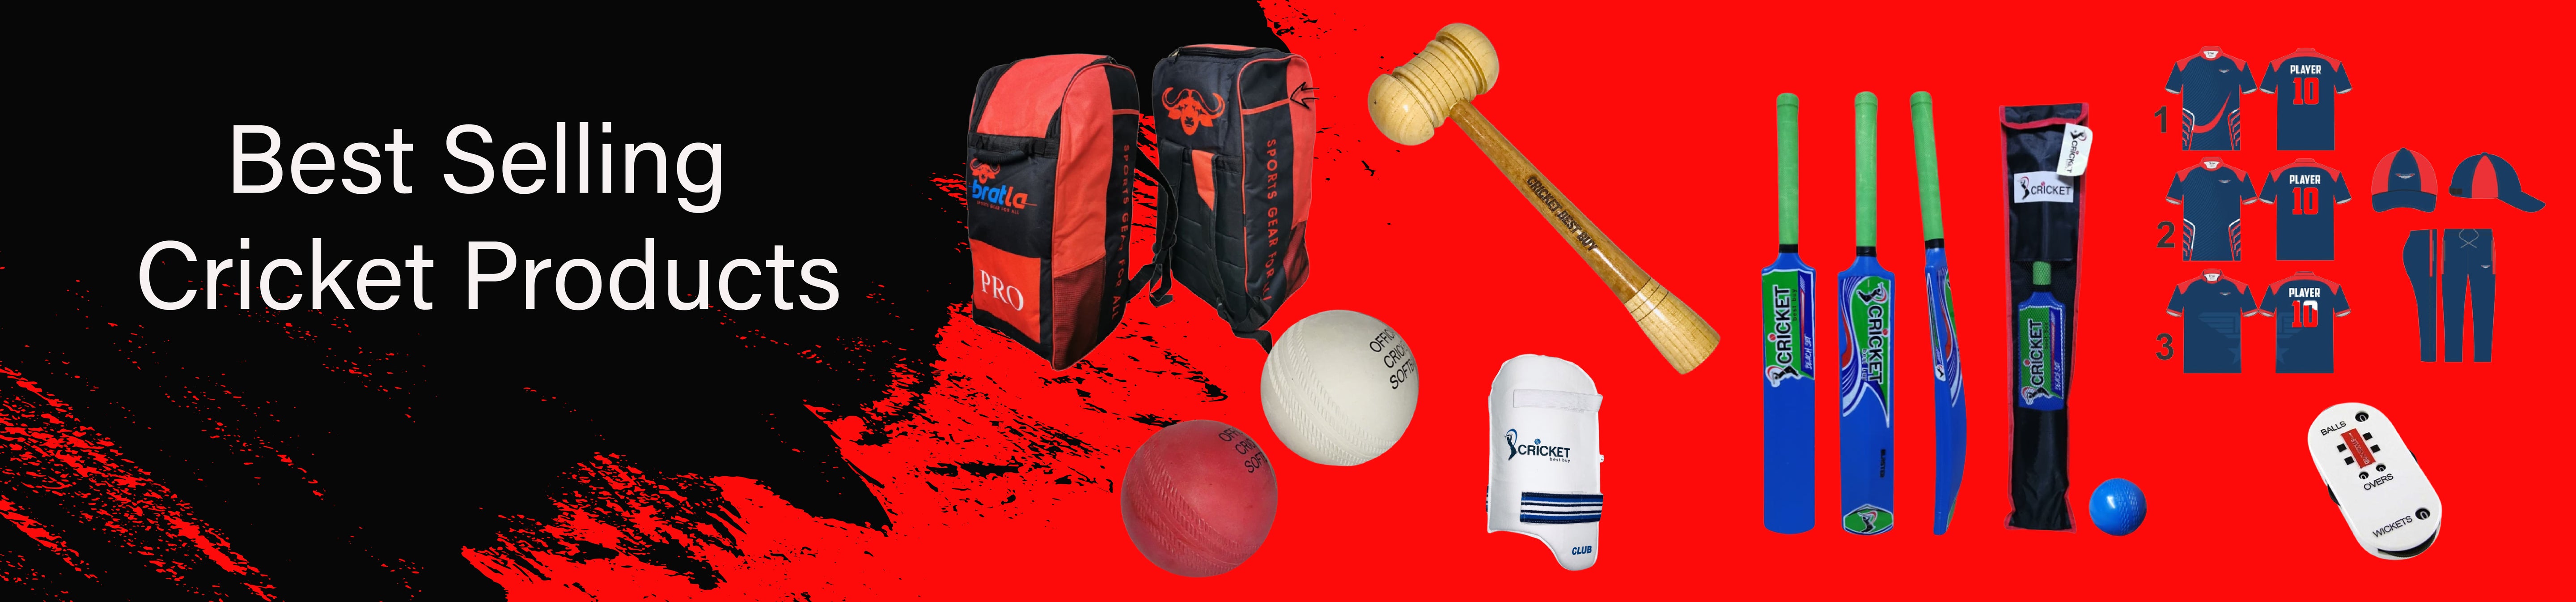 Best Selling Cricket Products -